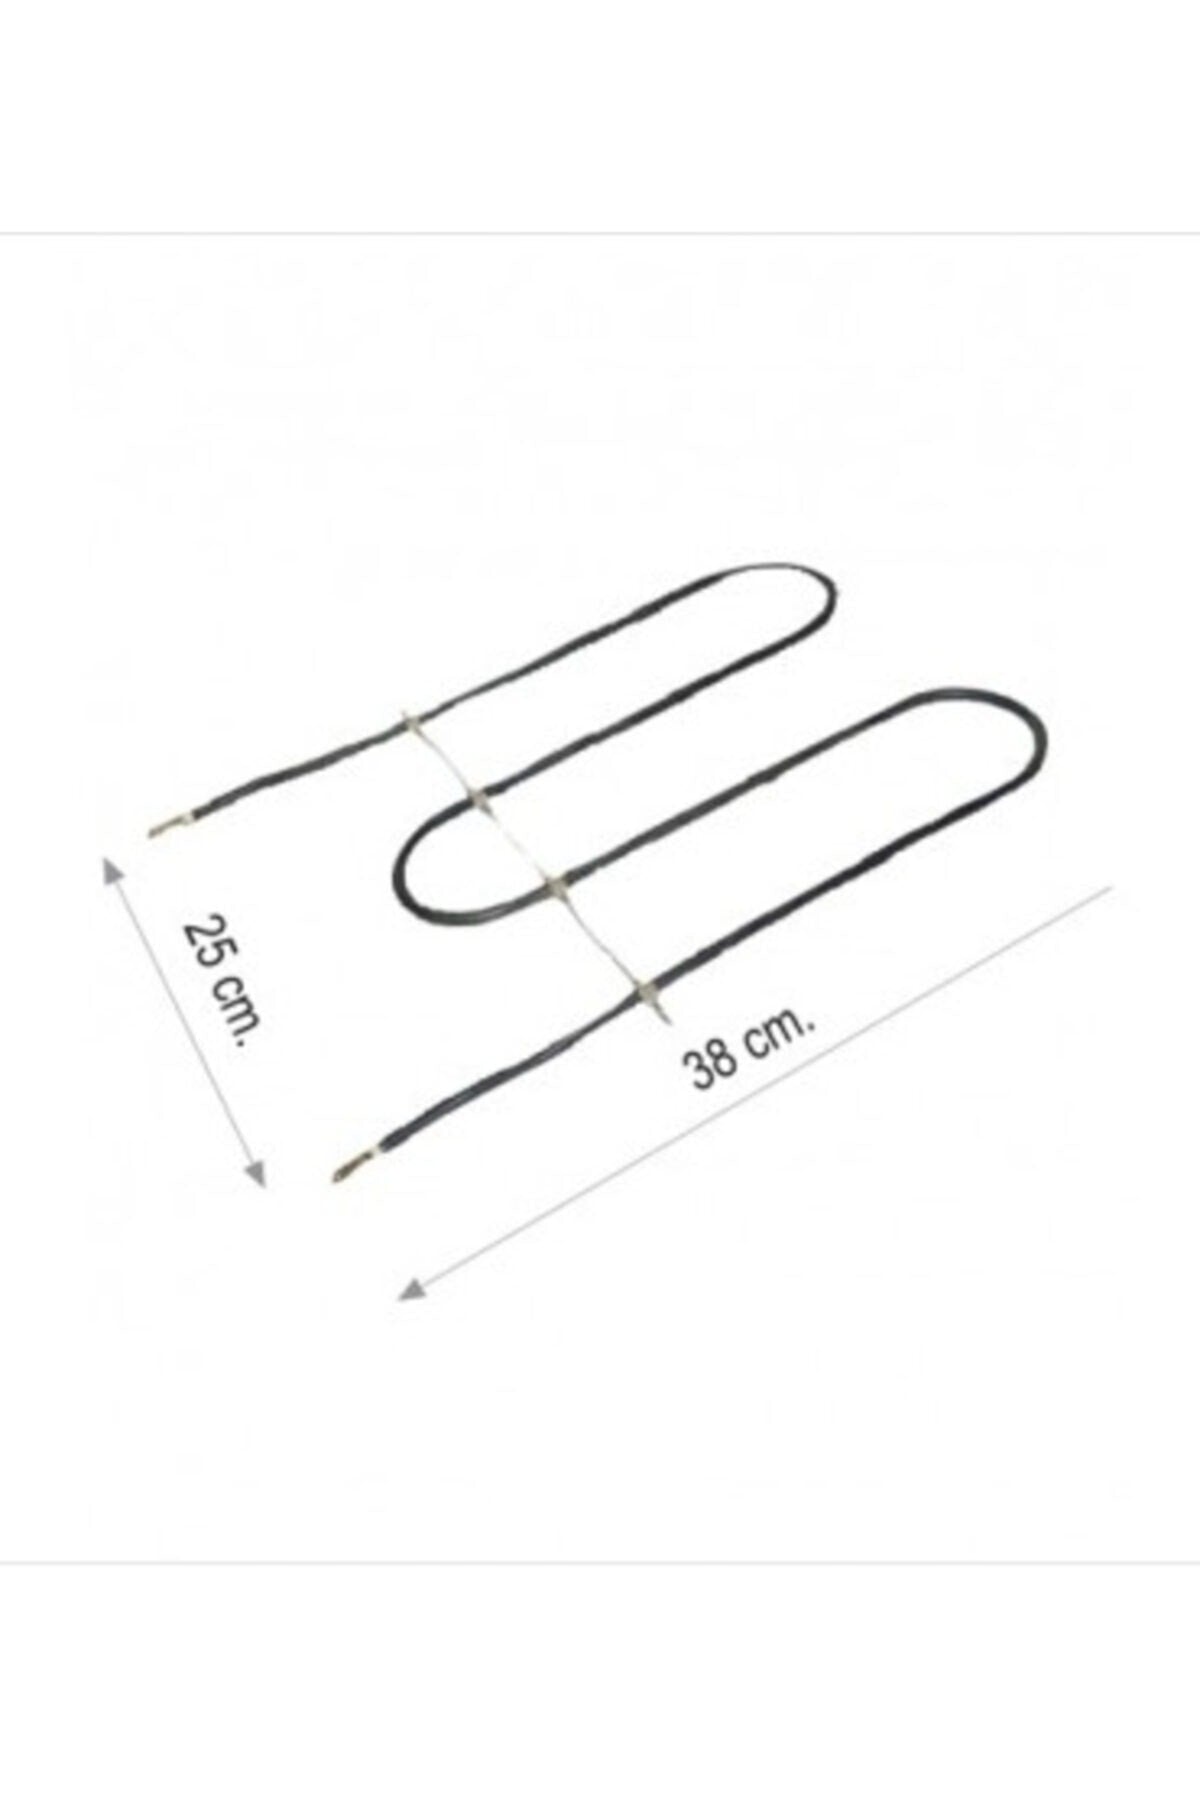 Oven Heating Resistance Element, Oven Heater- Accessory Spare Part 1000  watt - 220 V - 6.5Ø Chrome(Cr-Ni) - 250x380 mm